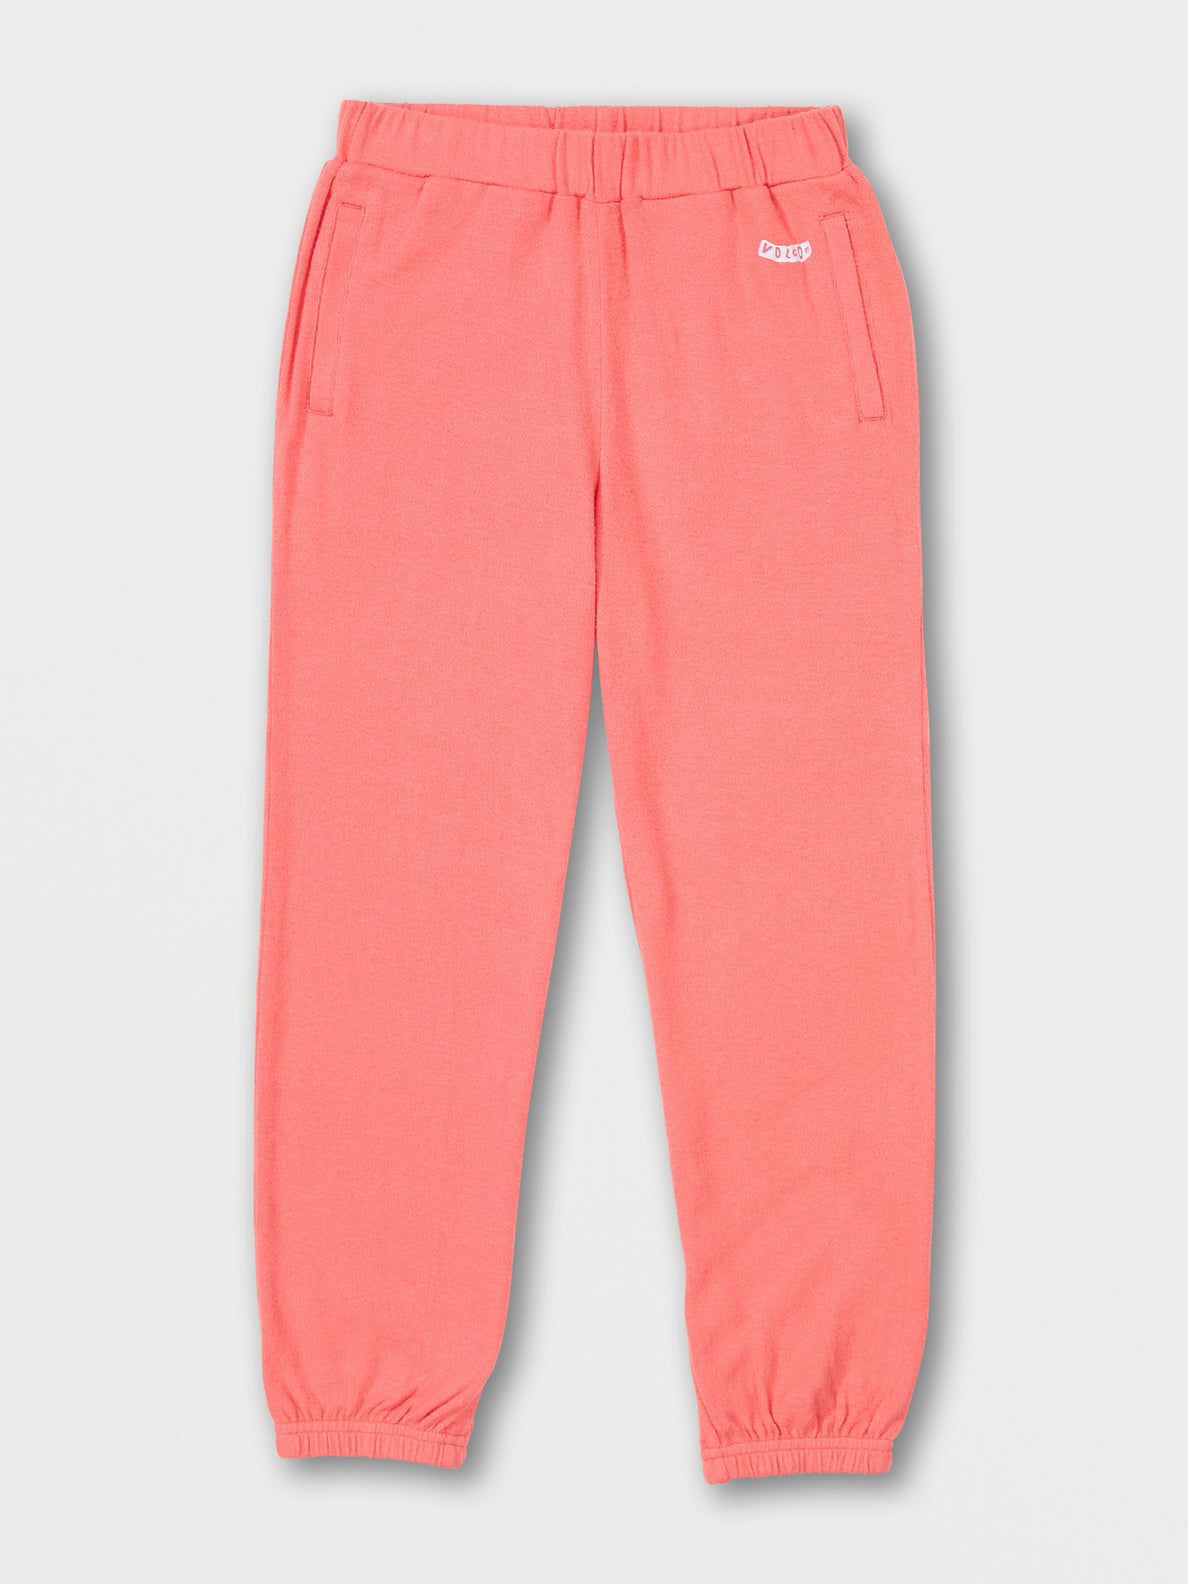 Big Girls Lived In Lounge Fleece Pant - Electric Coral (R1212102_ELC) [5]